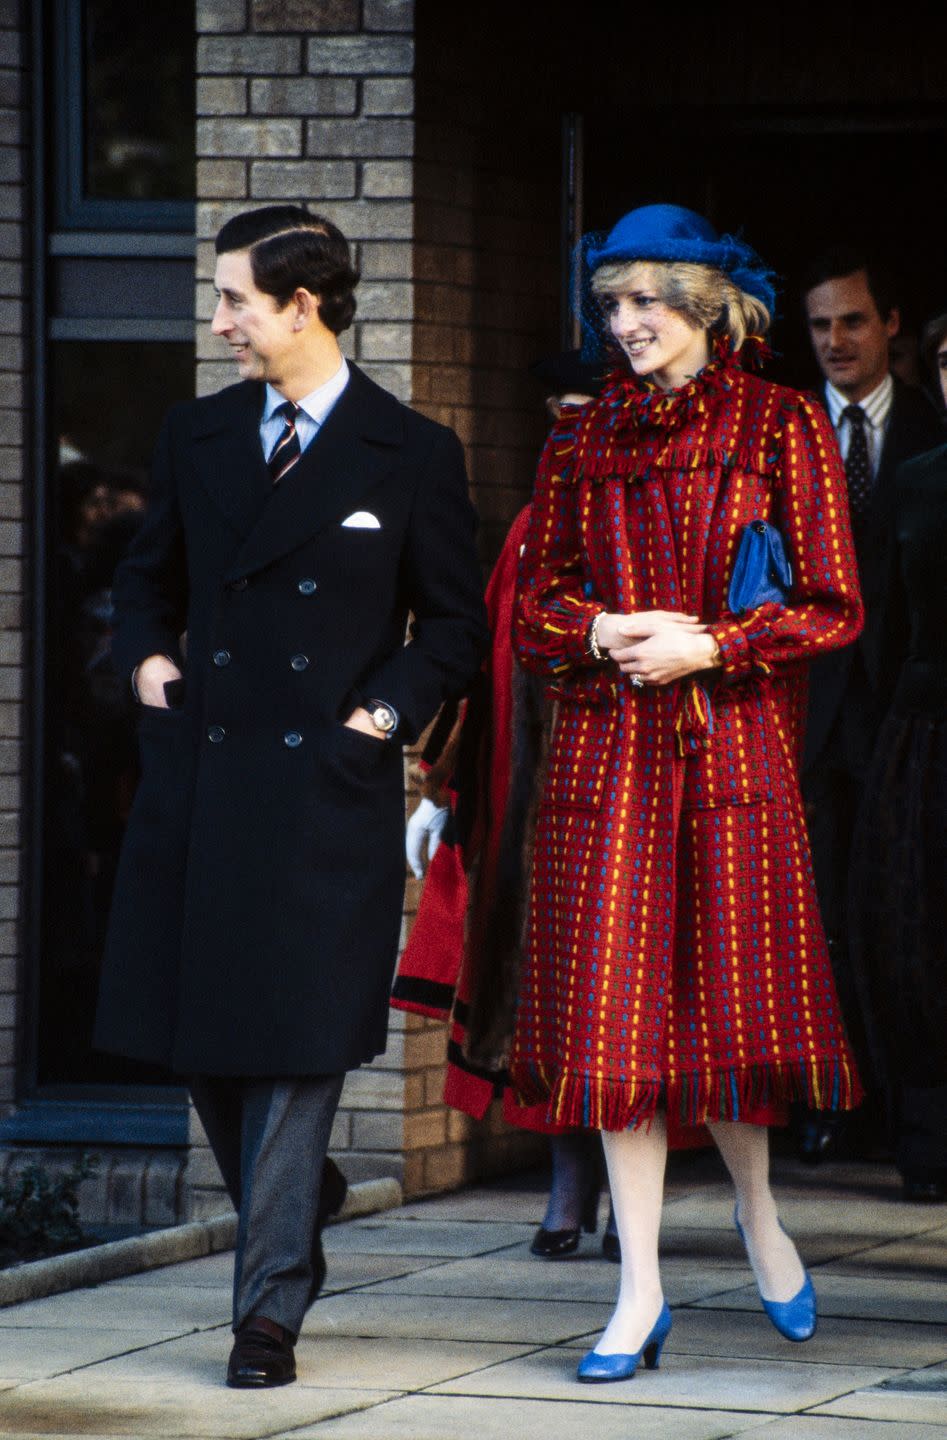 london november 5 prince charles princess diana at the guildhall in london, on november 5, 1981, the day it was announced that she was pregnant with prince william photo by david levensongetty images